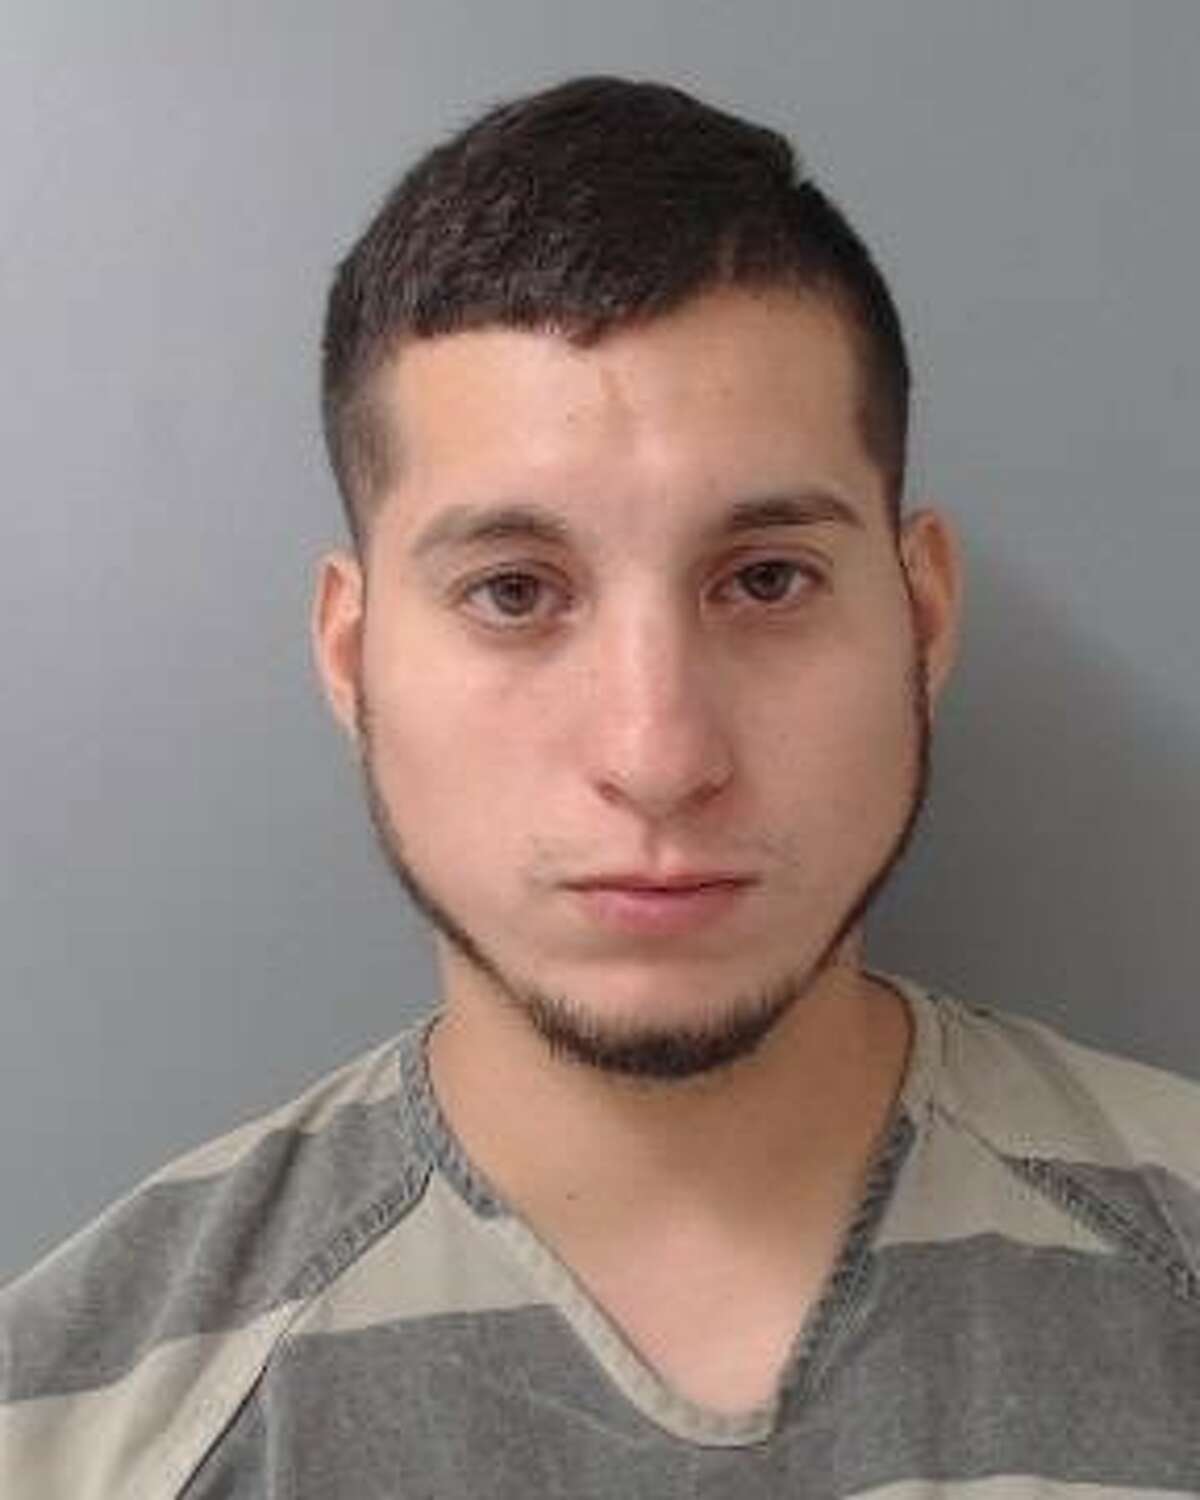 Gregorio Galvan III, 25, was charged with assault, family violence by impeding breath, circulation.